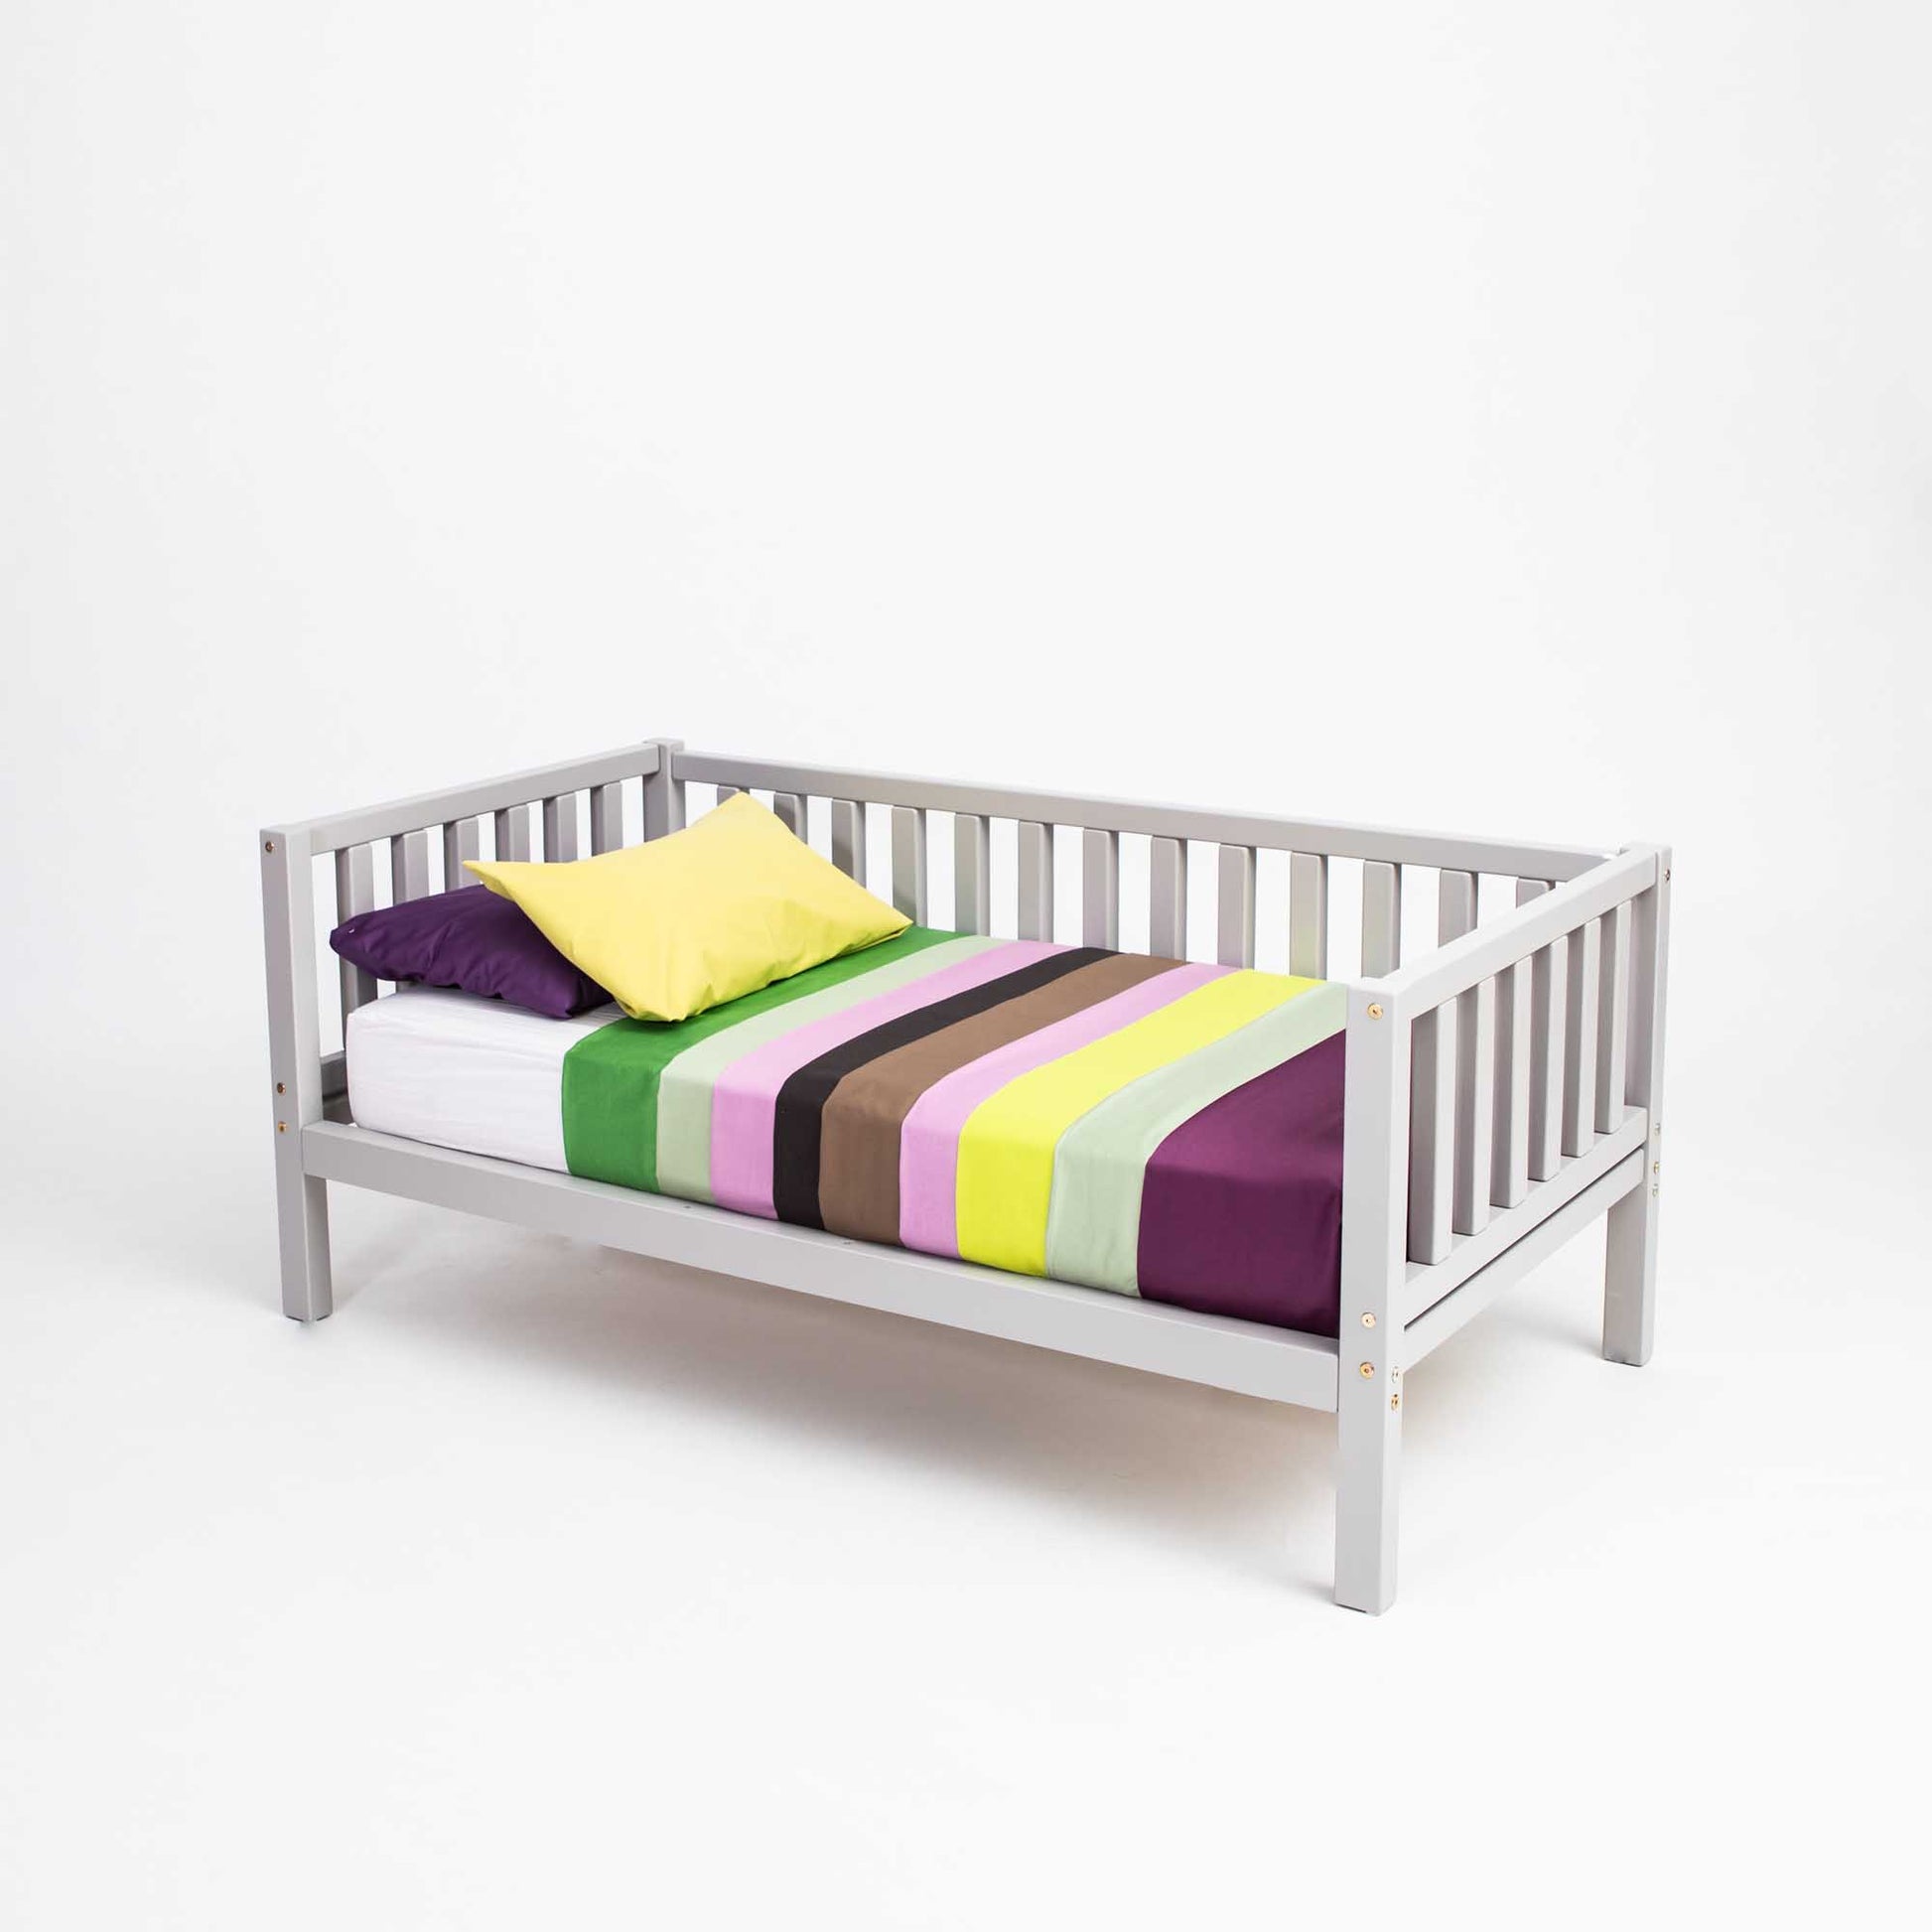 A 2-in-1 toddler bed on legs with a 3-sided vertical rail from Sweet Home From Wood for children with colorful striped sheets.